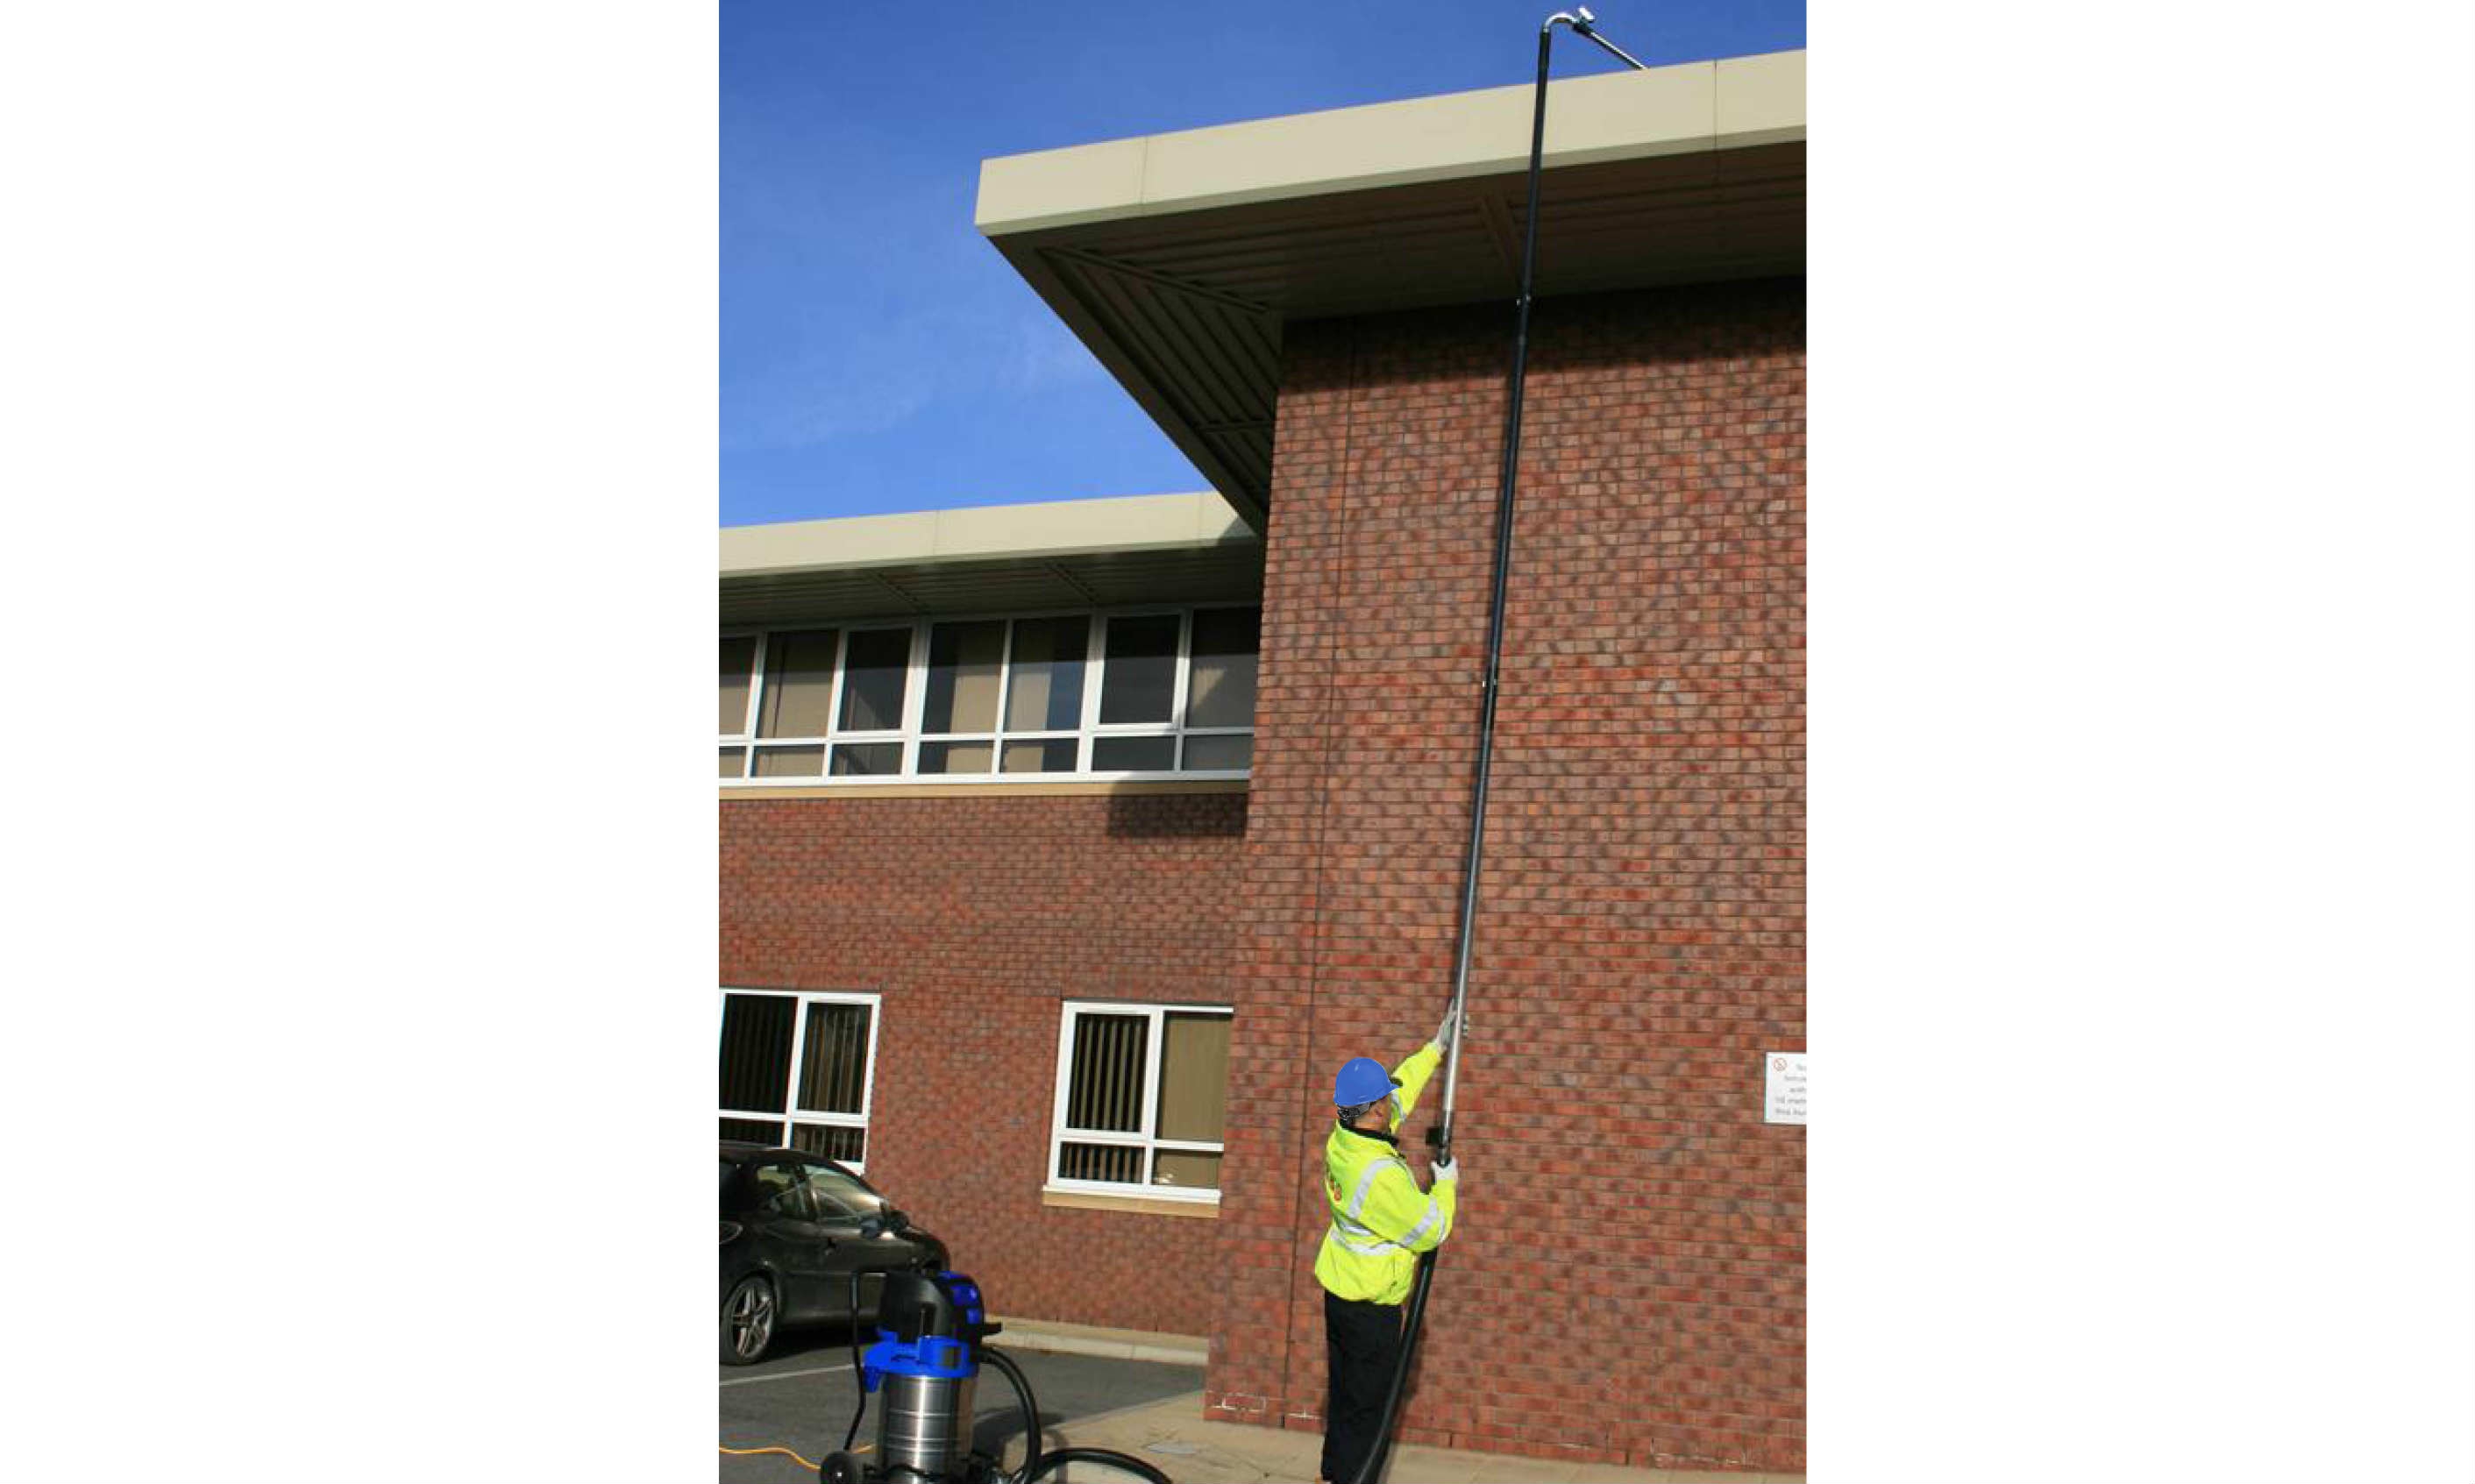 Expert Gutter clearing, with less hassle, less mess and less risk!